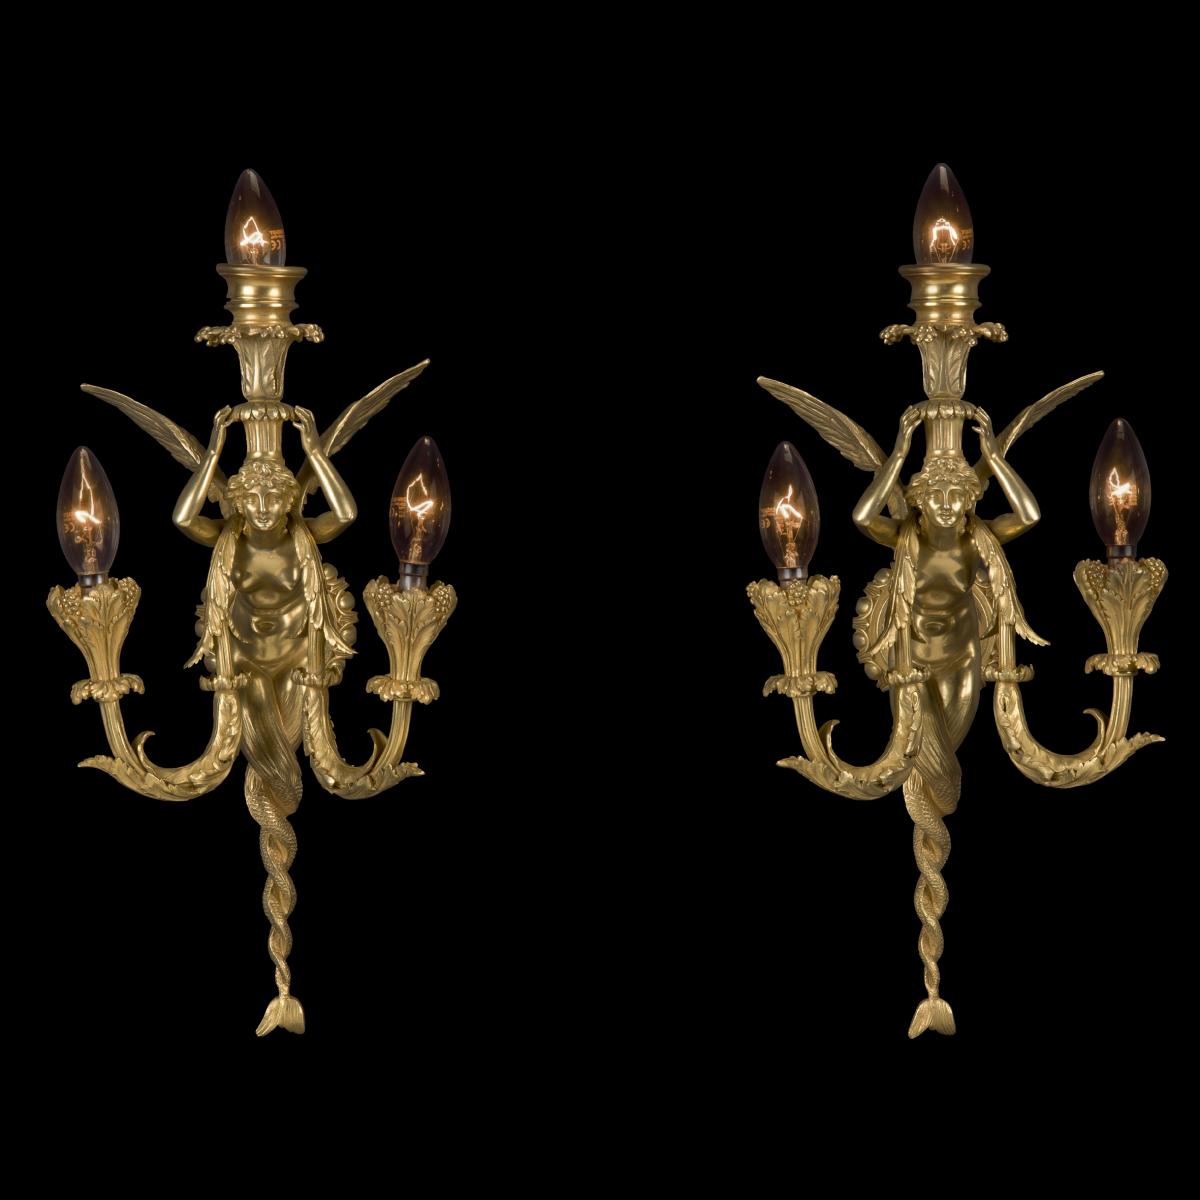 Pair of Napoléon III Wall Lights, By Maison Millet